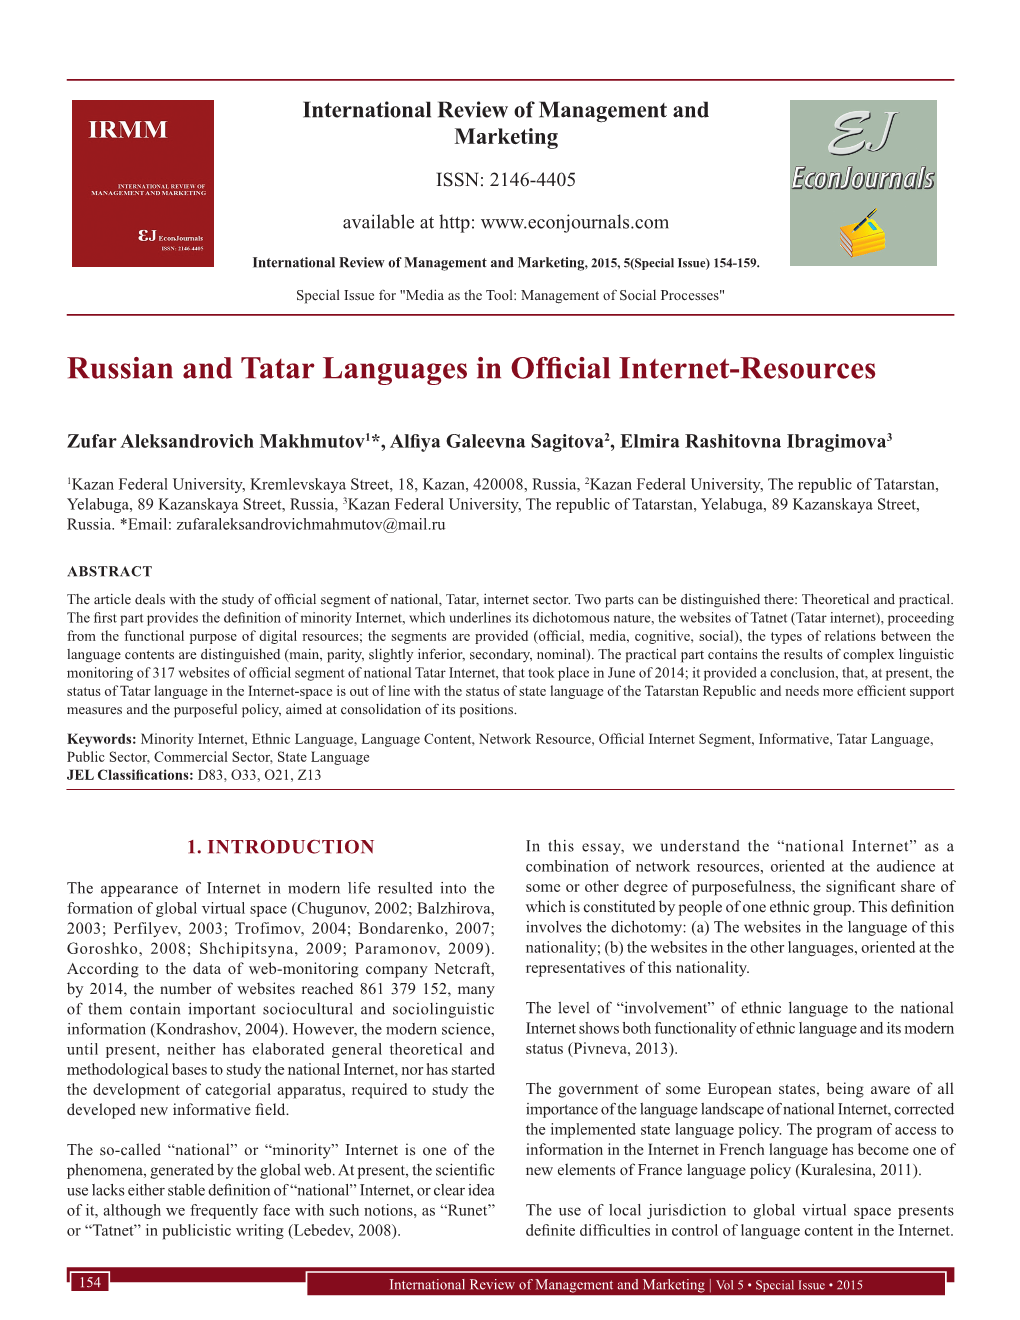 Russian and Tatar Languages in Official Internet-Resources